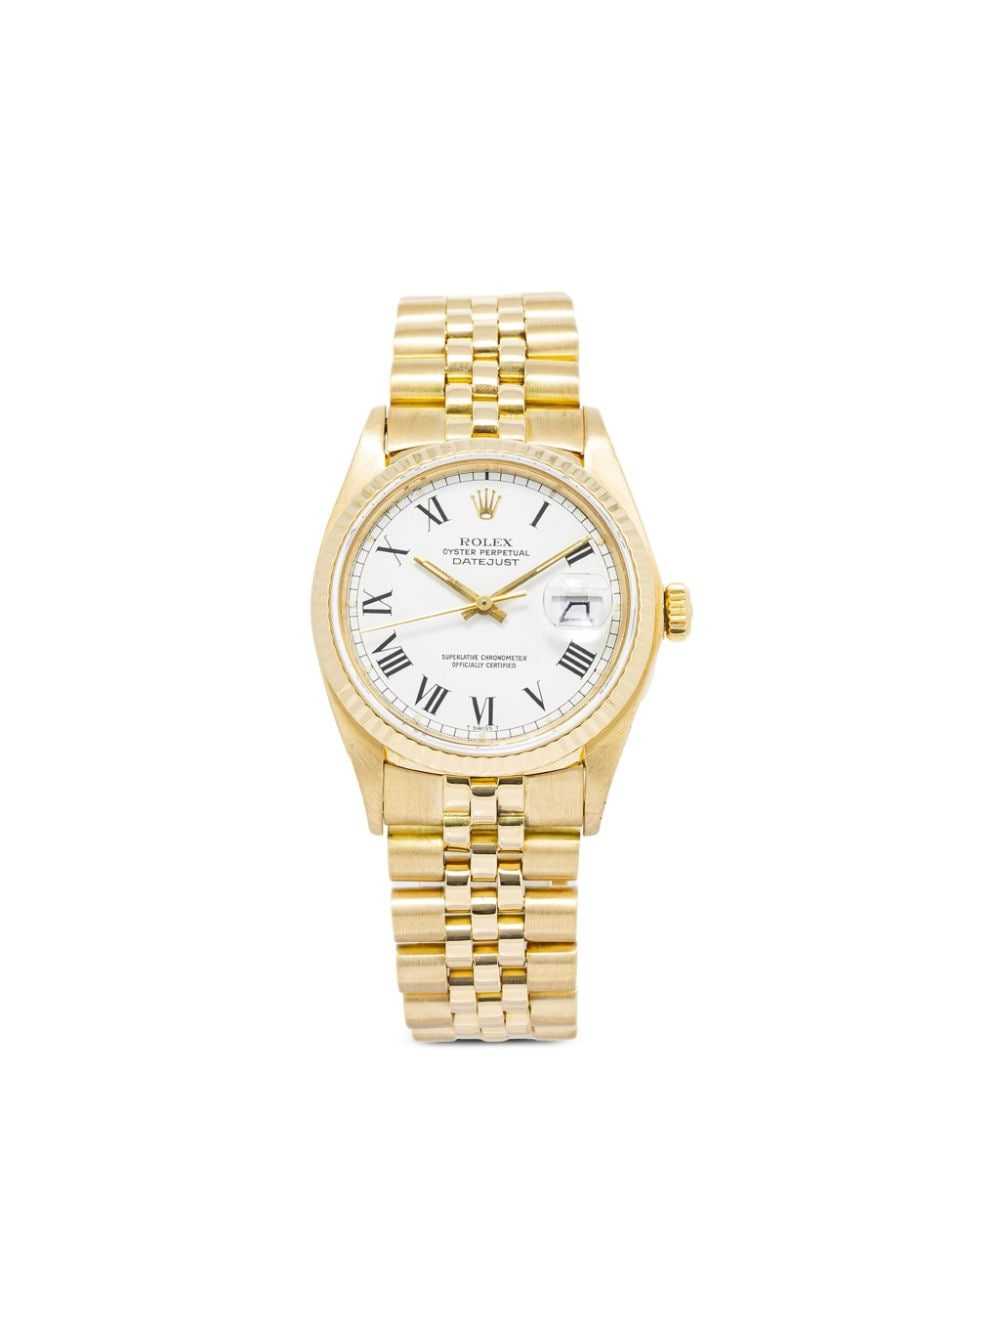 Rolex pre-owned Datejust 36mm - White - image 1